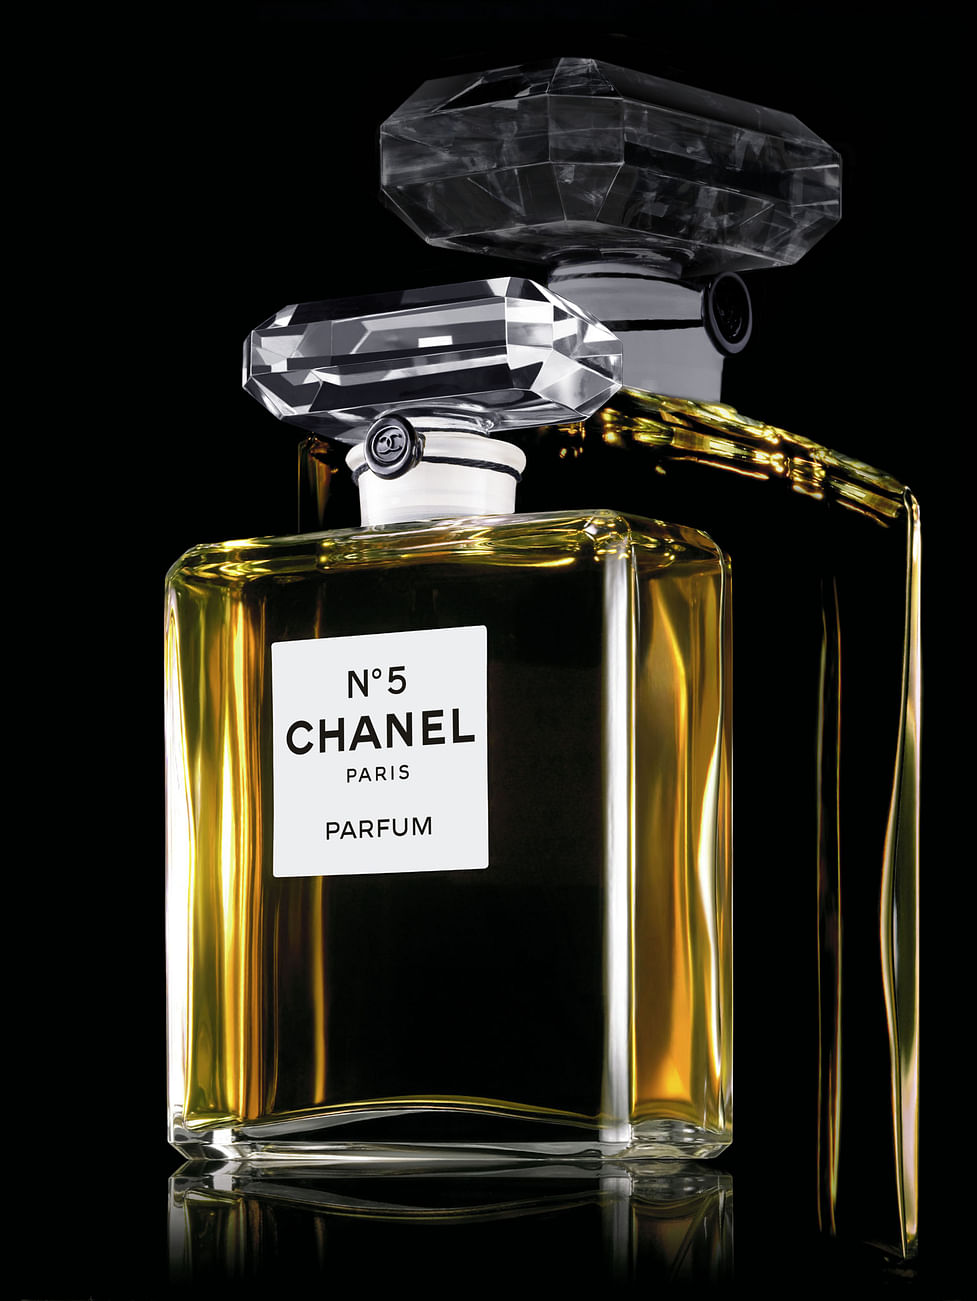 Chanel No5 Celebrates 100 Years, Stories